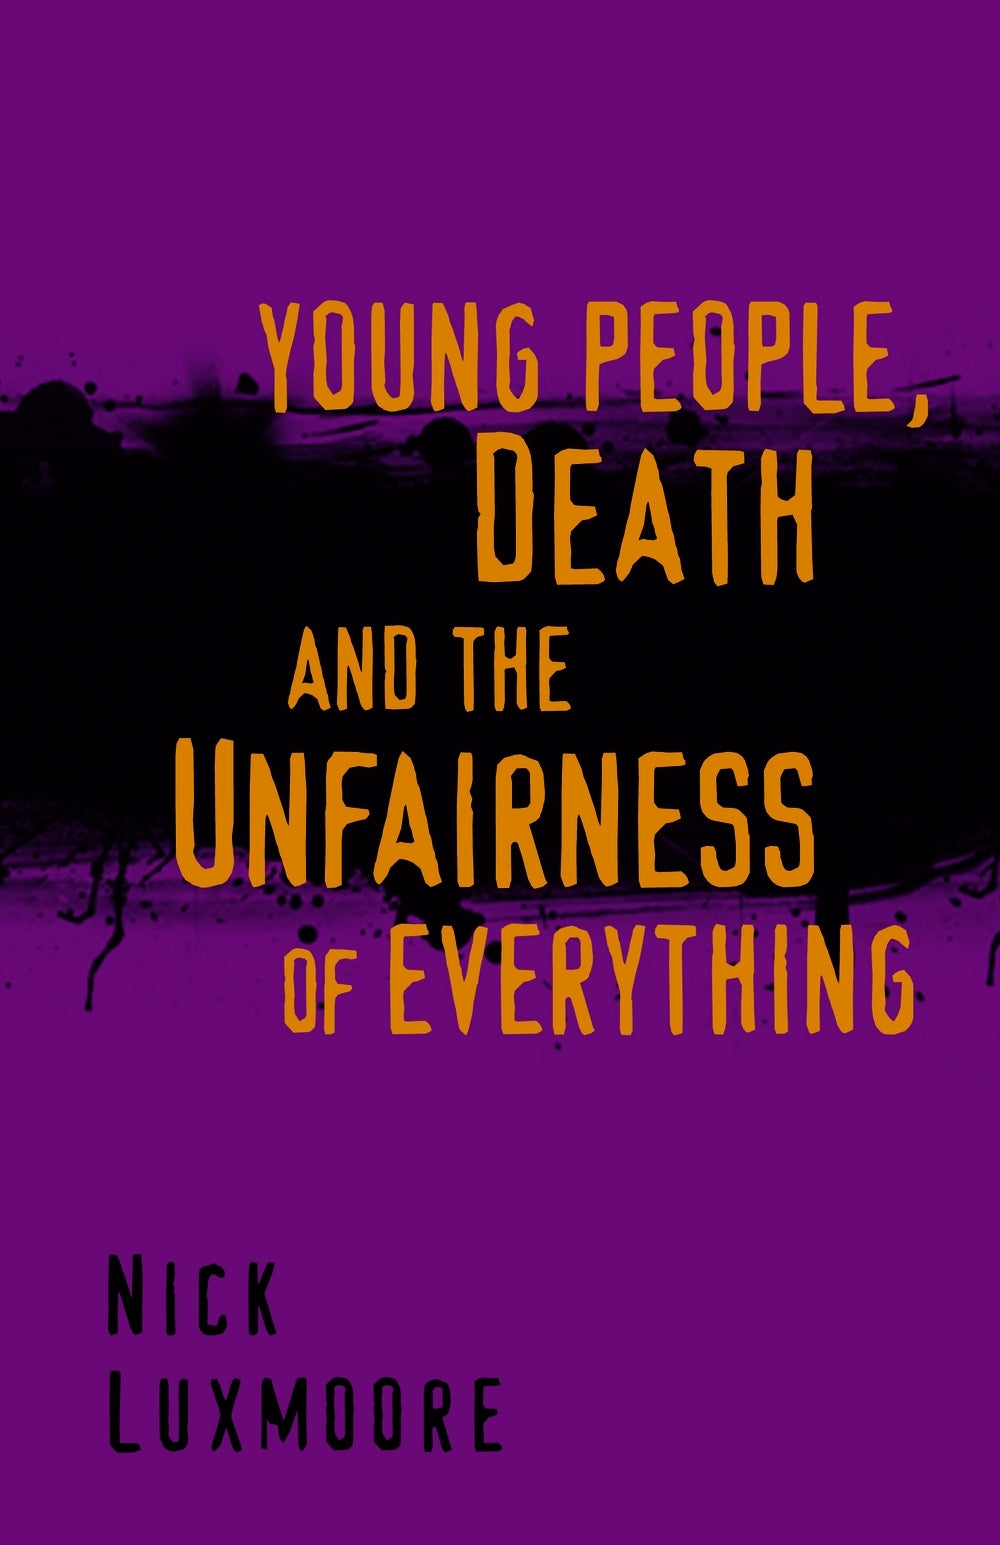 Young People, Death and the Unfairness of Everything by Nick Luxmoore